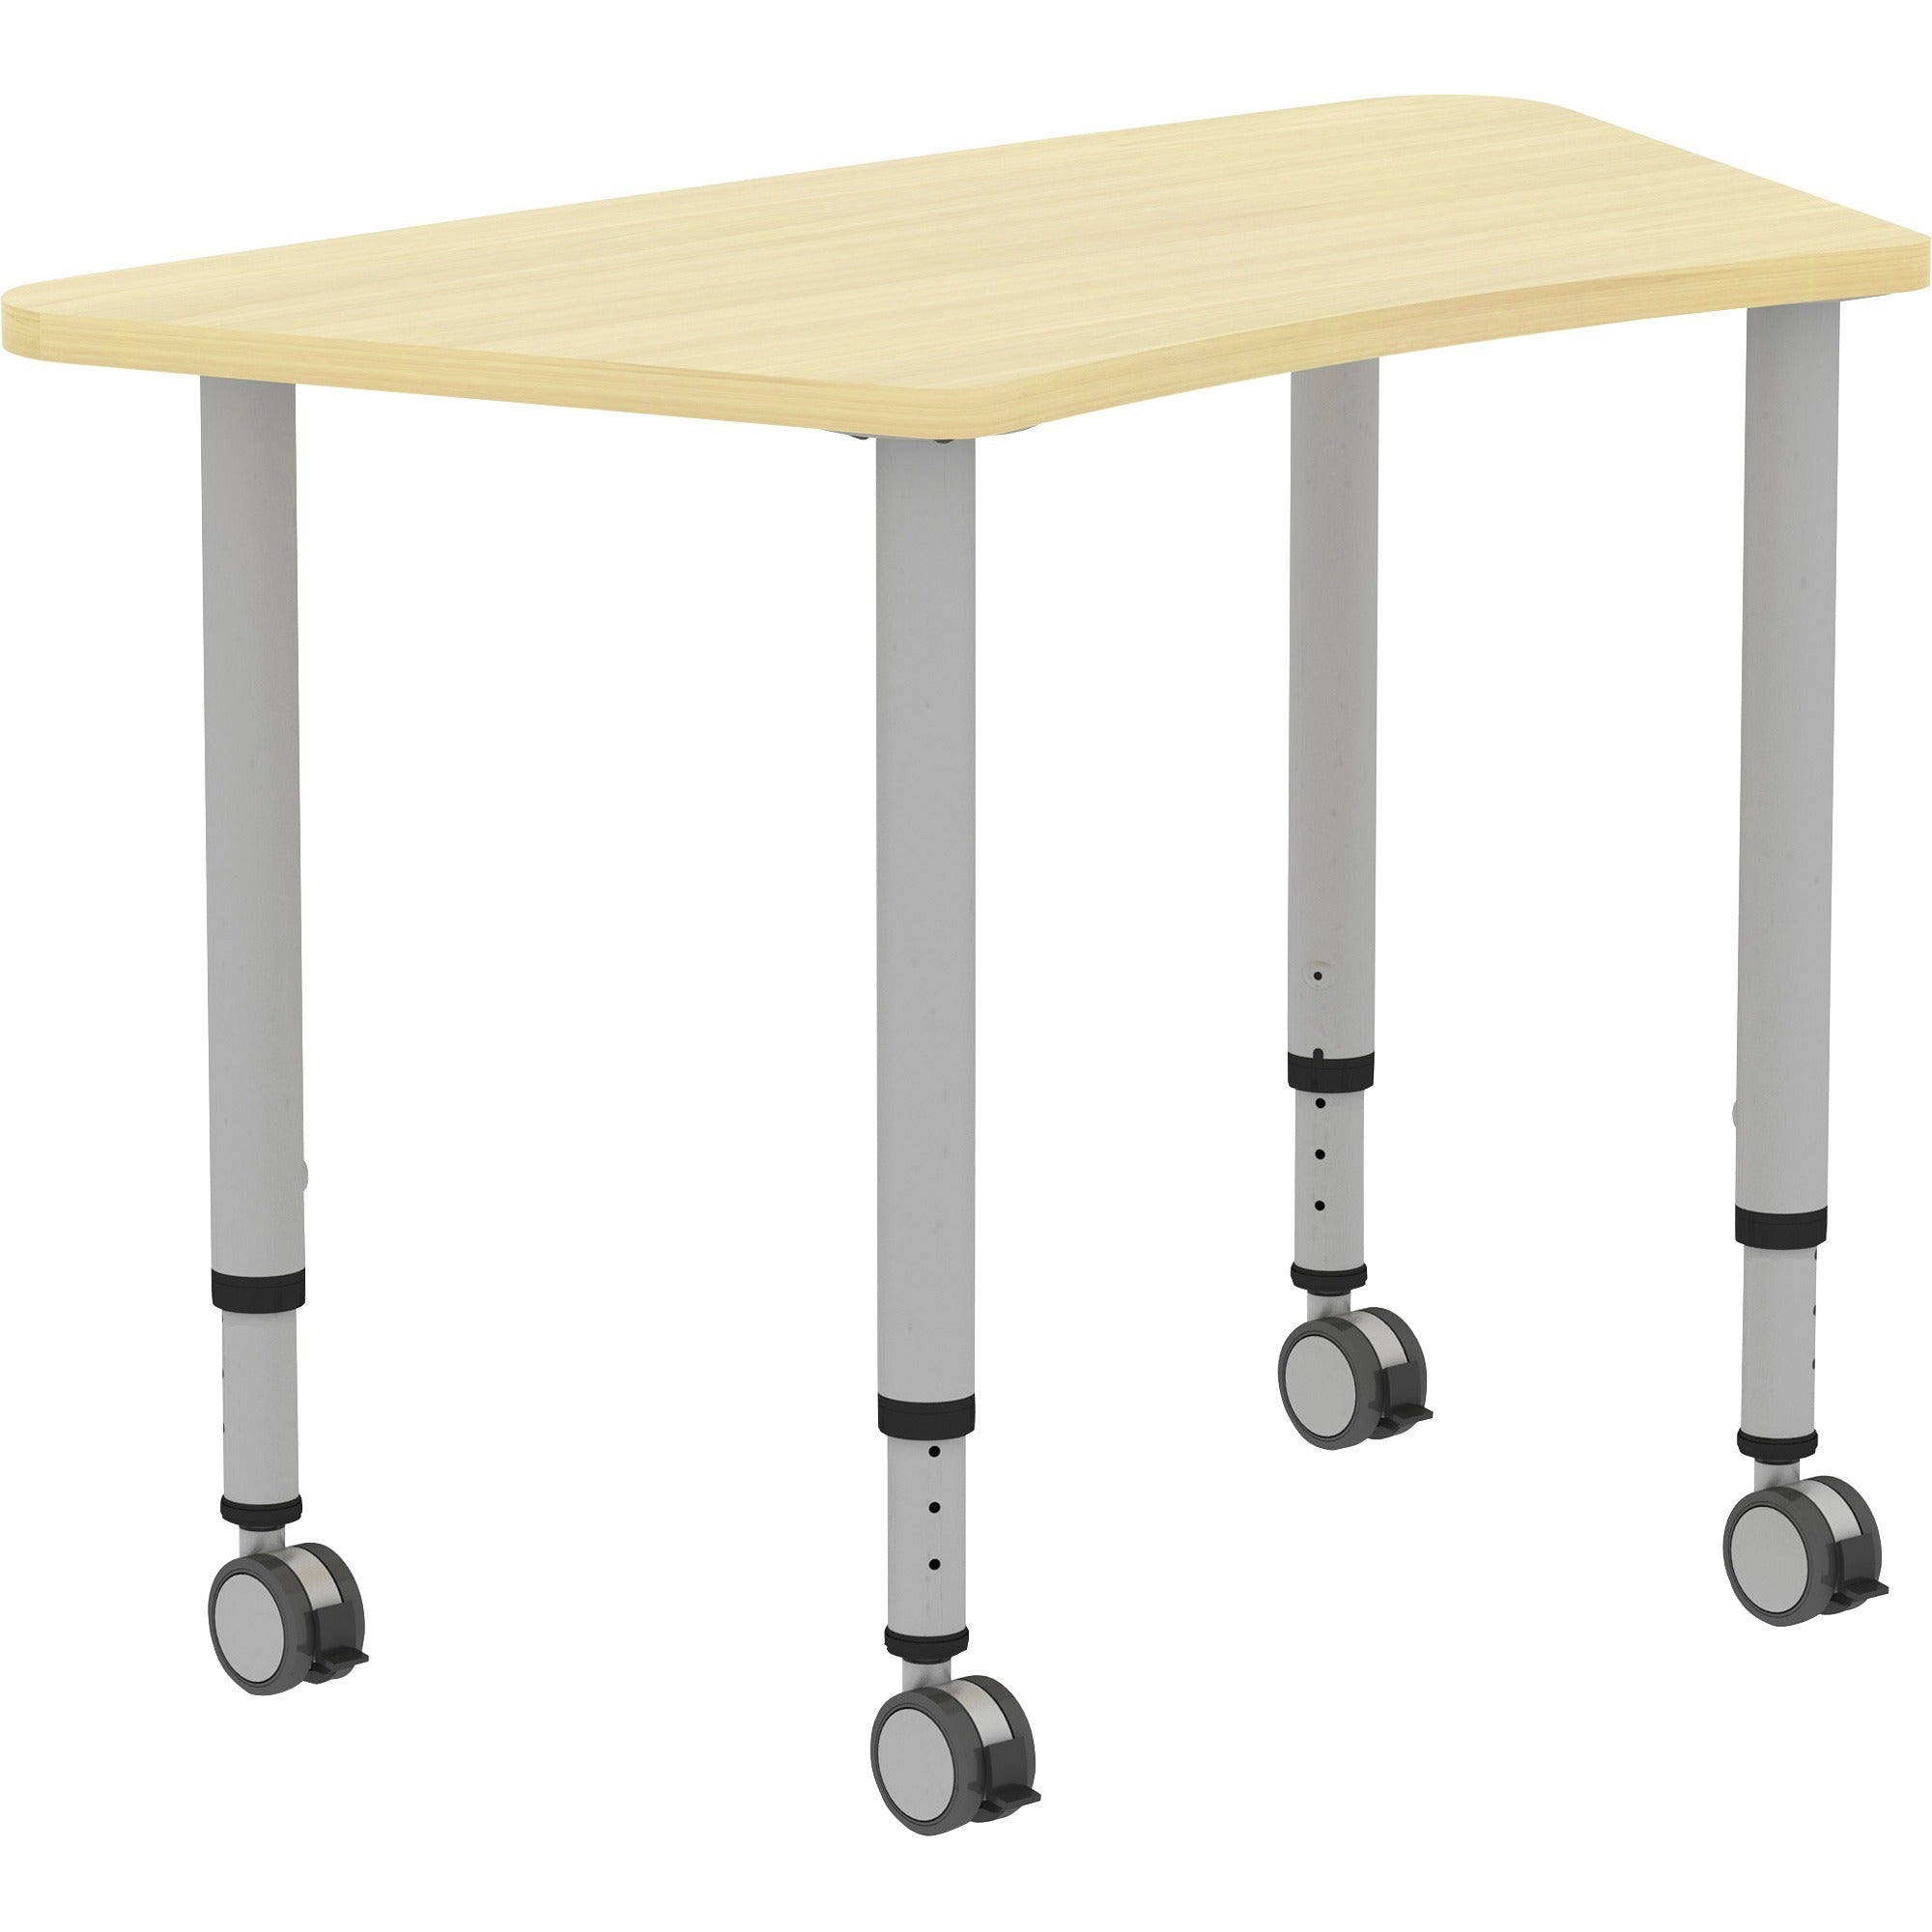 lorell-attune-height-adjustable-multipurpose-curved-table-for-table-toptrapezoid-top-adjustable-height-2662-to-3362-adjustment-x-60-table-top-width-x-2362-table-top-depth-3362-height-assembly-required-laminated-maple-laminat_llr69584 - 1